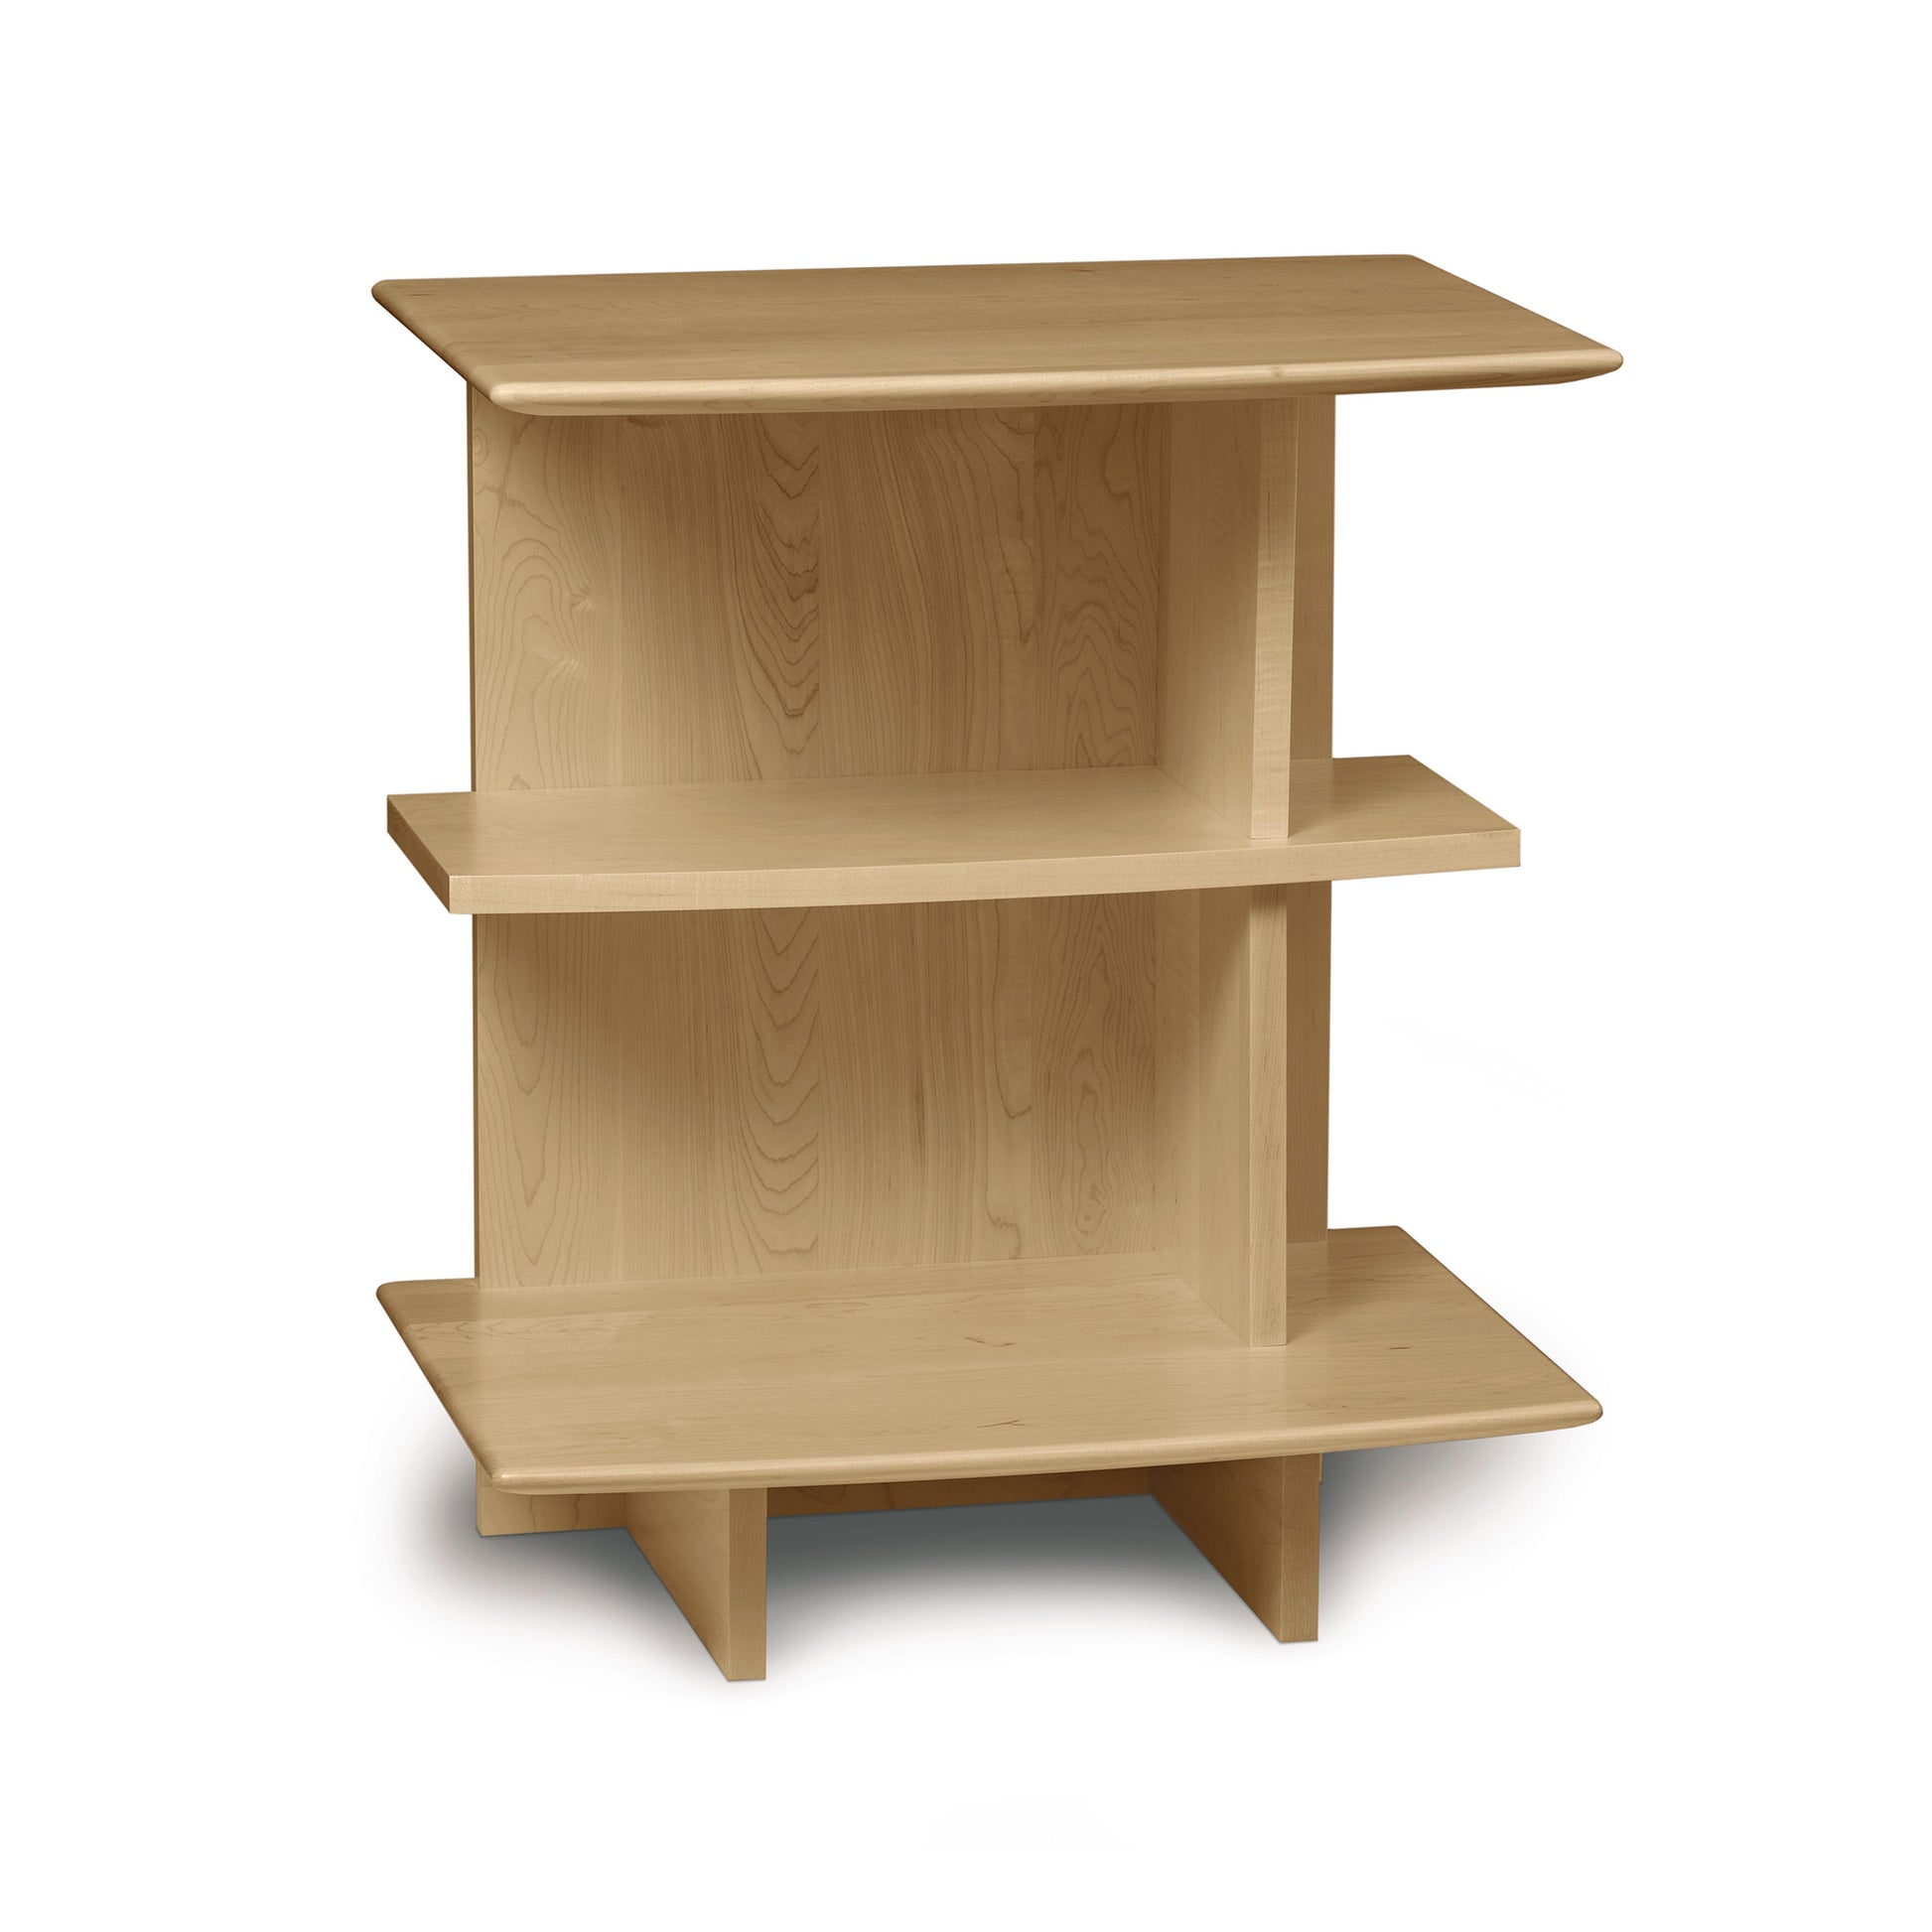 A Copeland Furniture solid wood Sarah Open Shelf Nightstand isolated on a white background.